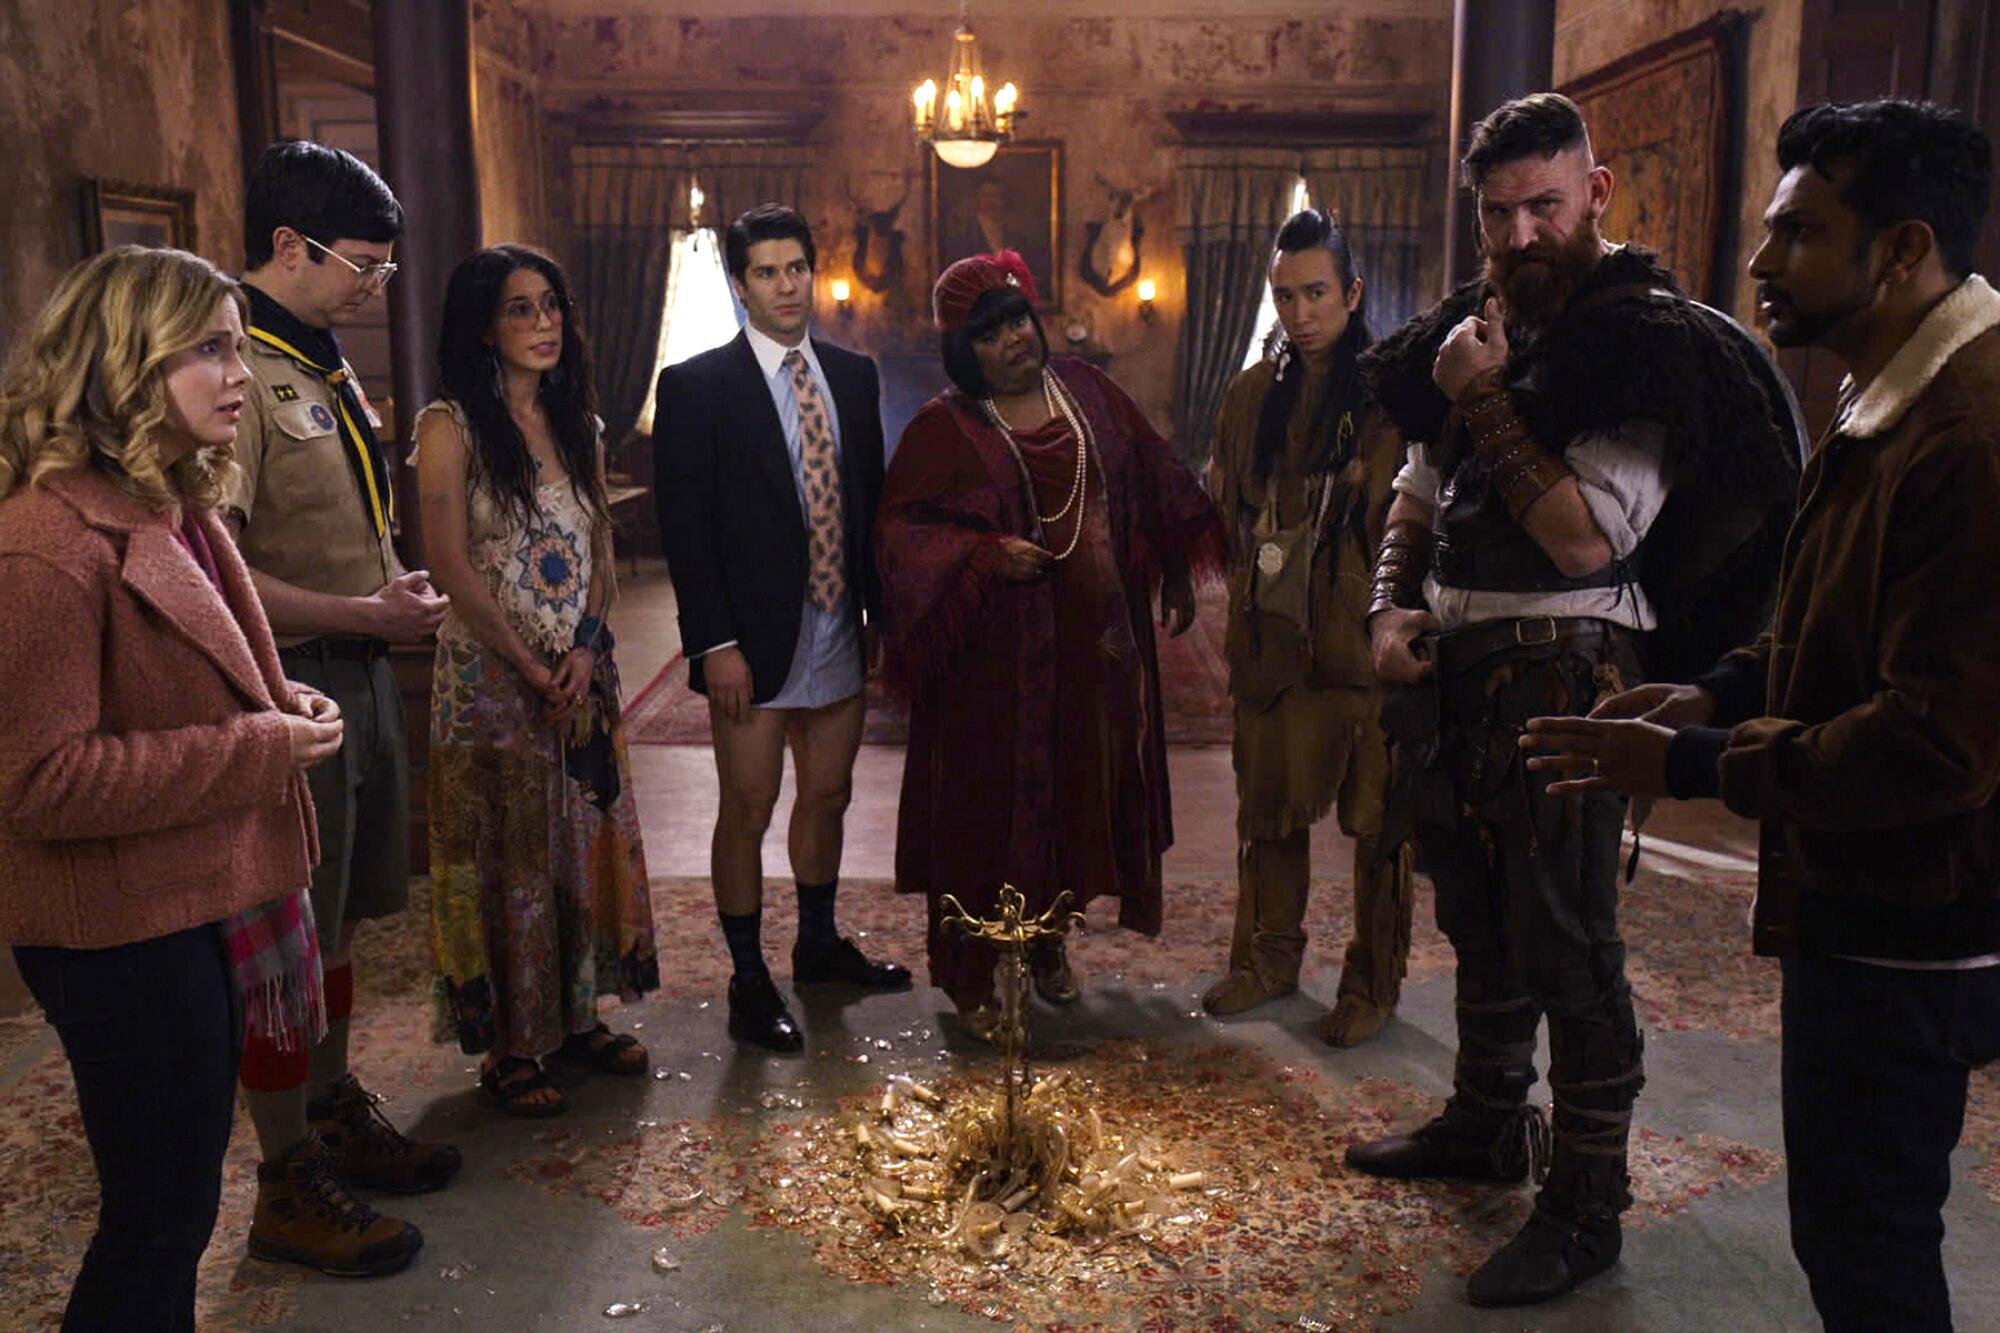 Eight people stand in a semi circle around a shattered chandelier on the floor.